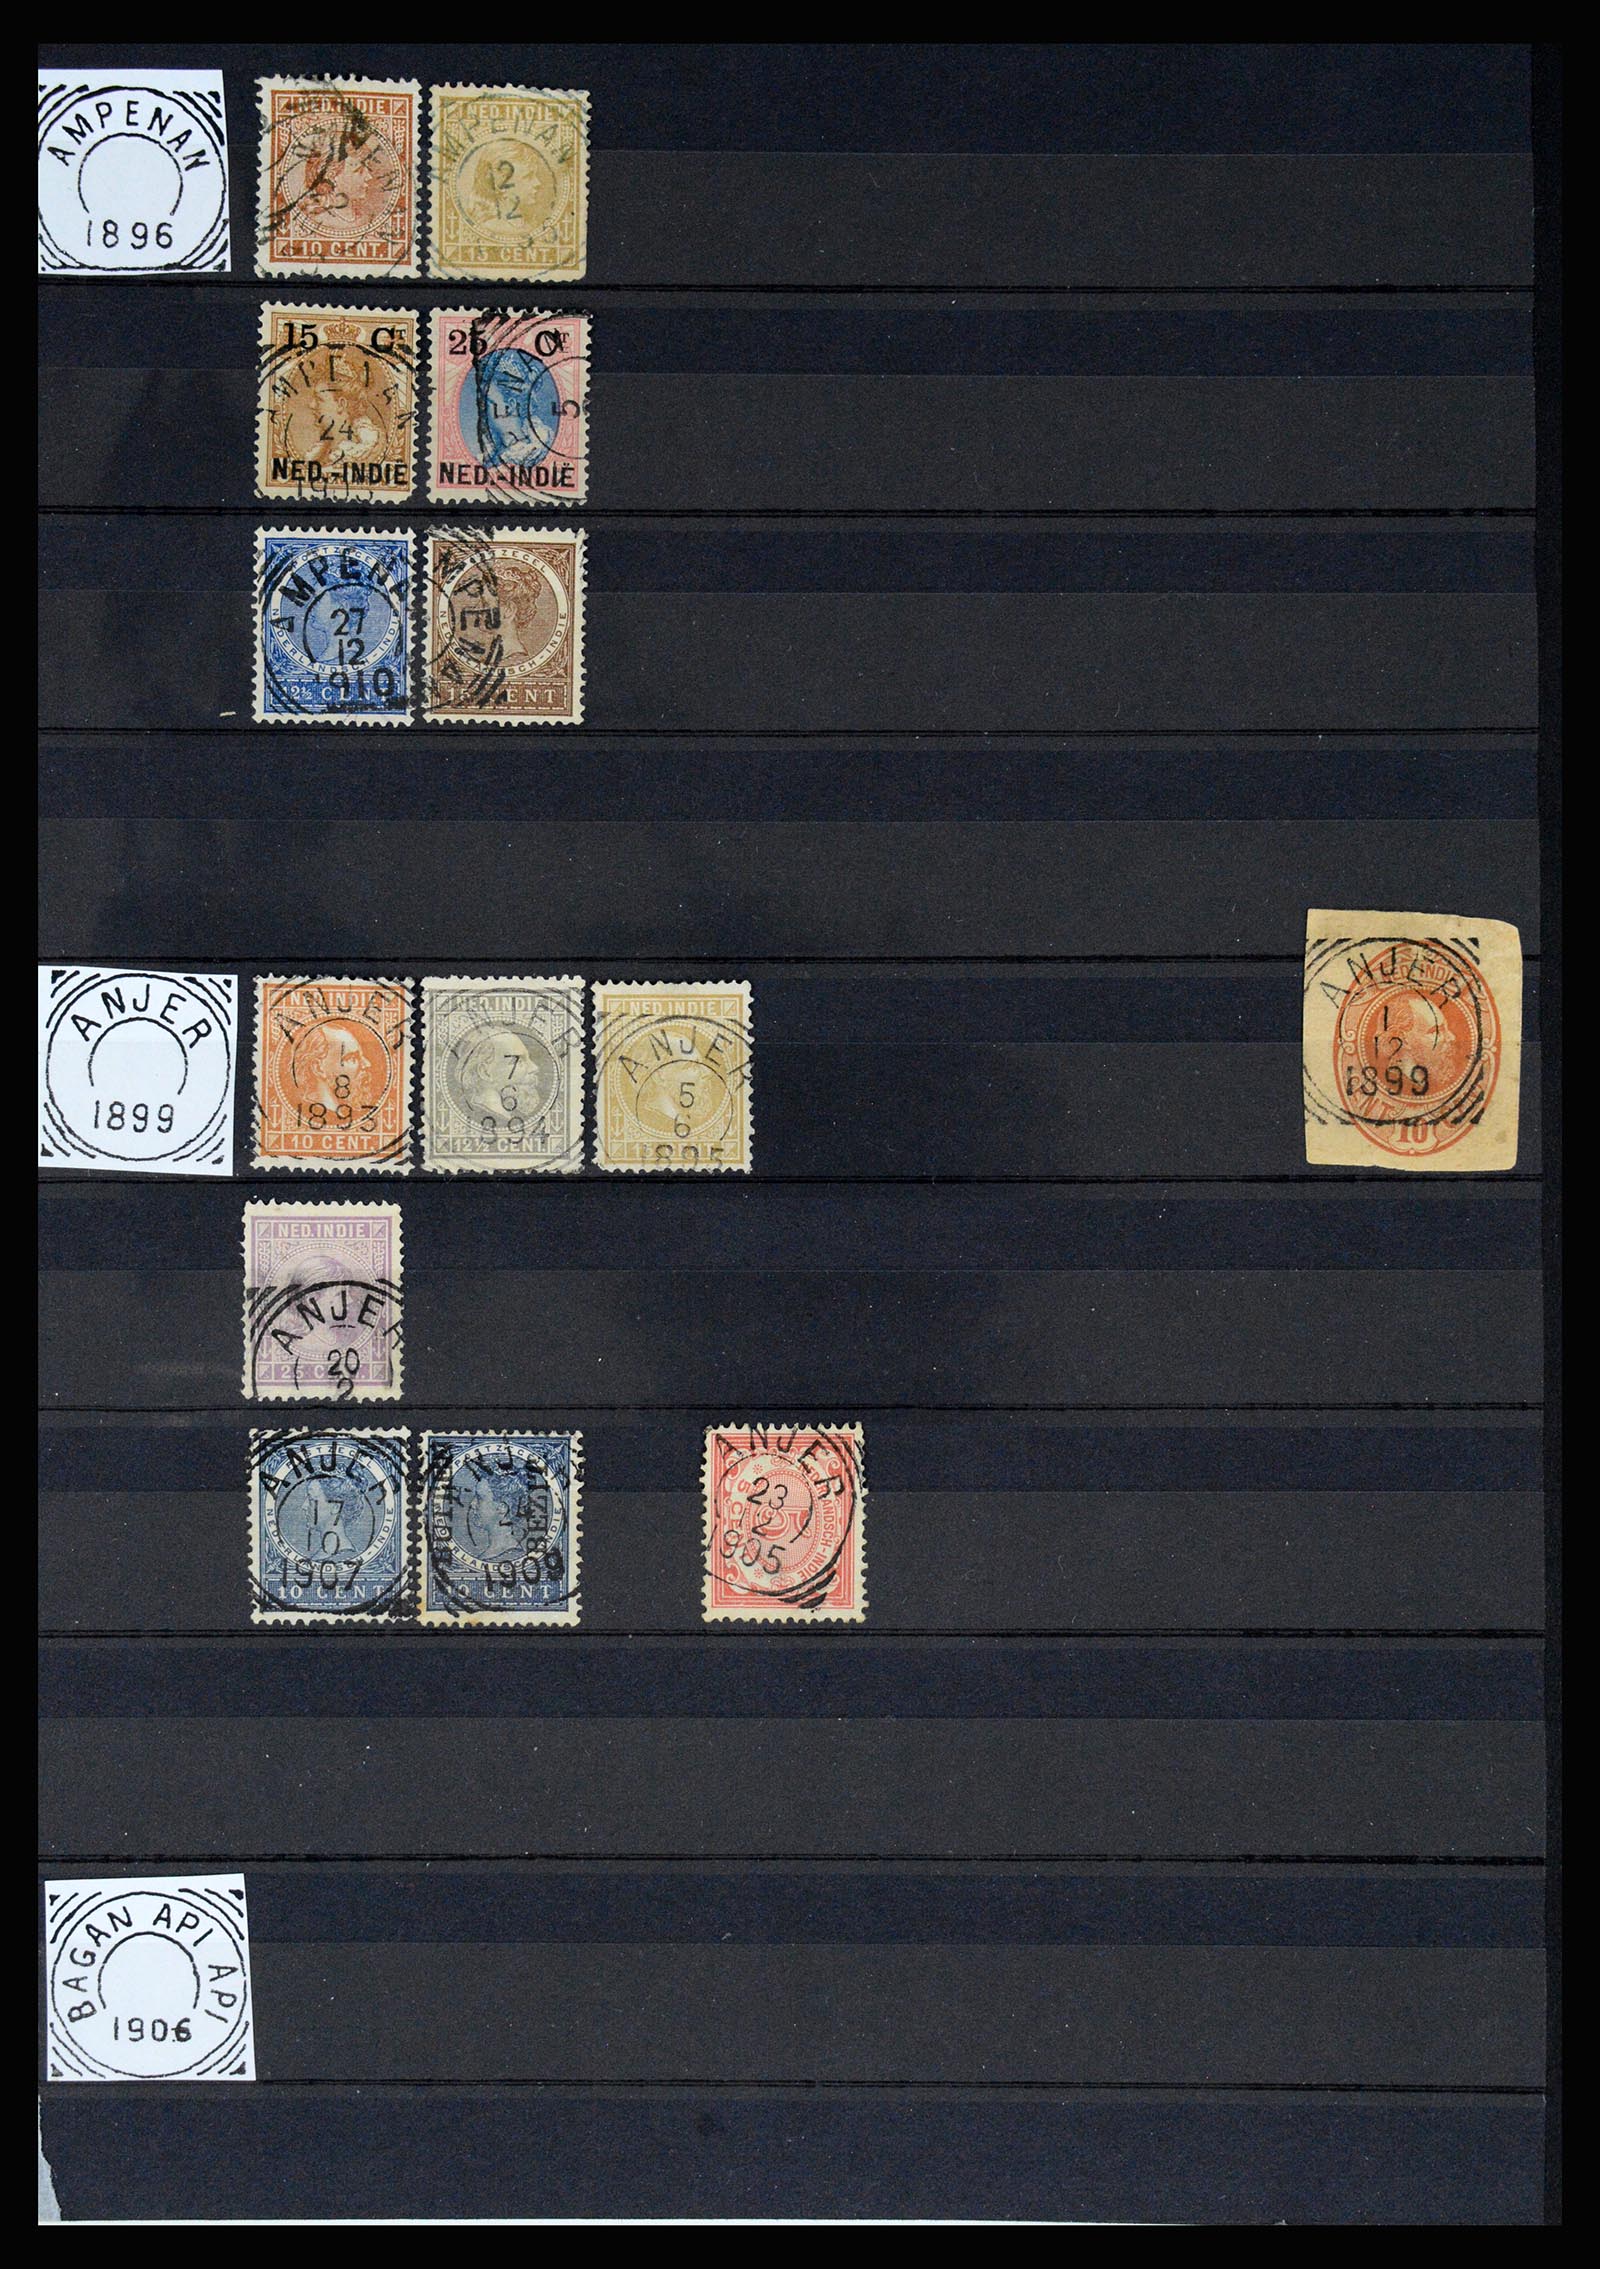 36839 002 - Stamp collection 36839 Dutch east Indies square cancels.